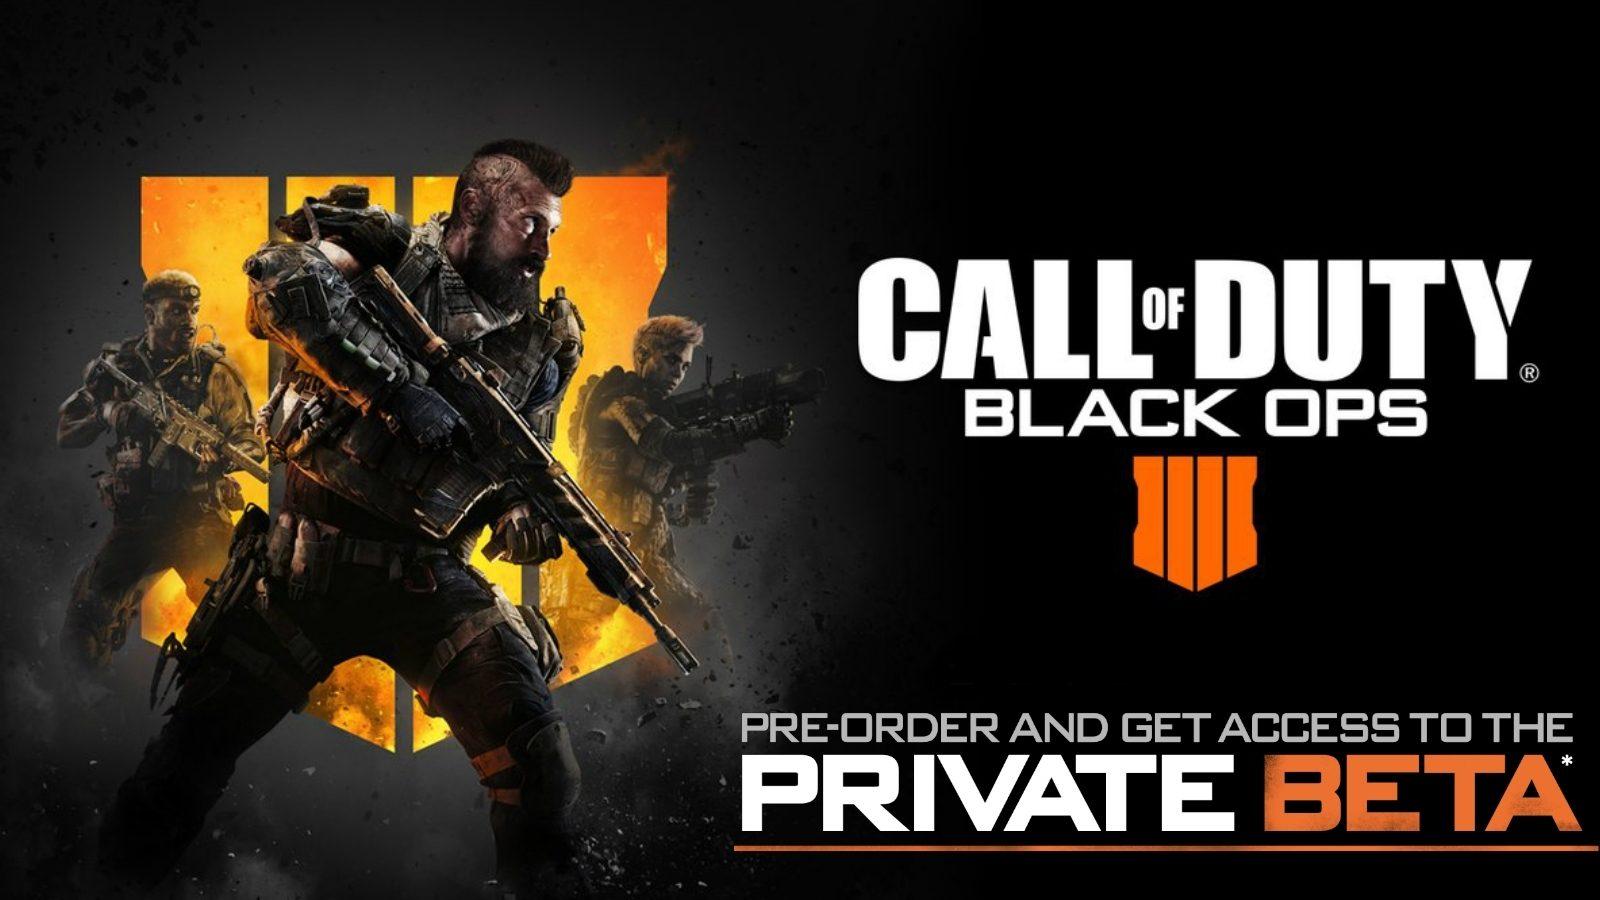 Let resident Shuraba How to Play the Call of Duty Black Ops 4 Multiplayer and Blackout Beta -  Dexerto